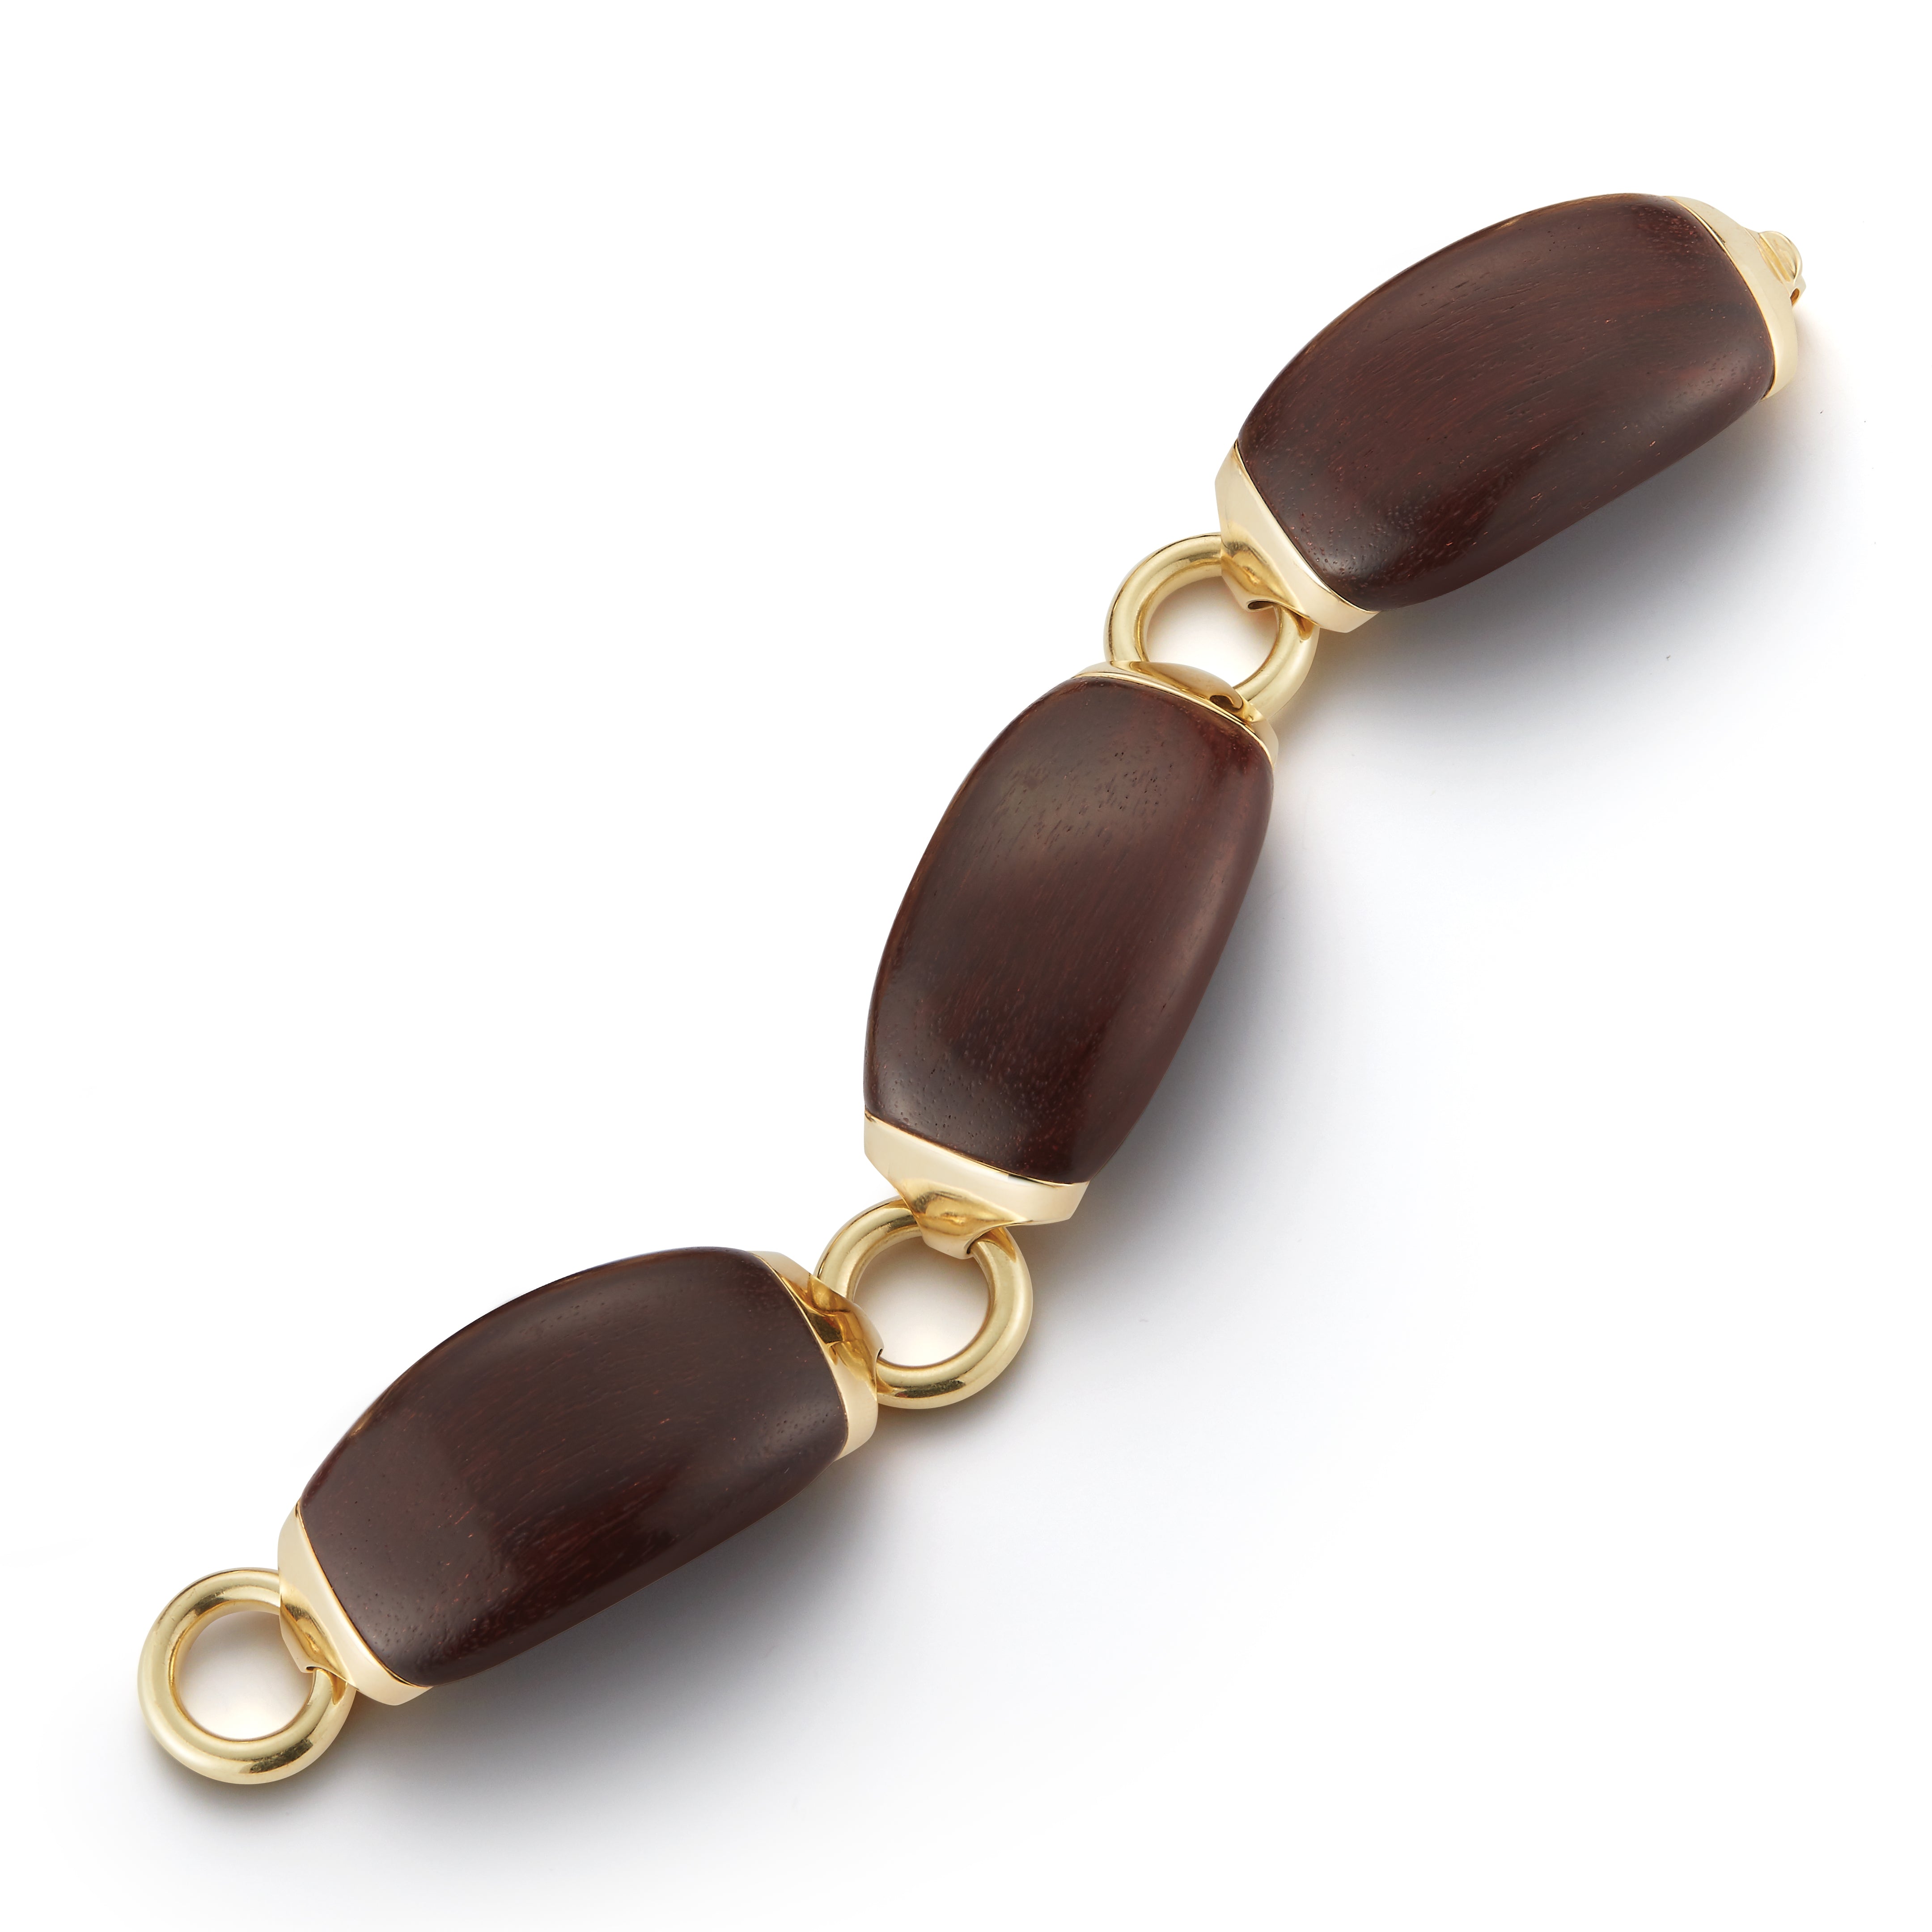 A Boat Link Bracelet in Rosewood and 18K Yellow Gold.  Signed Seaman Schepps.